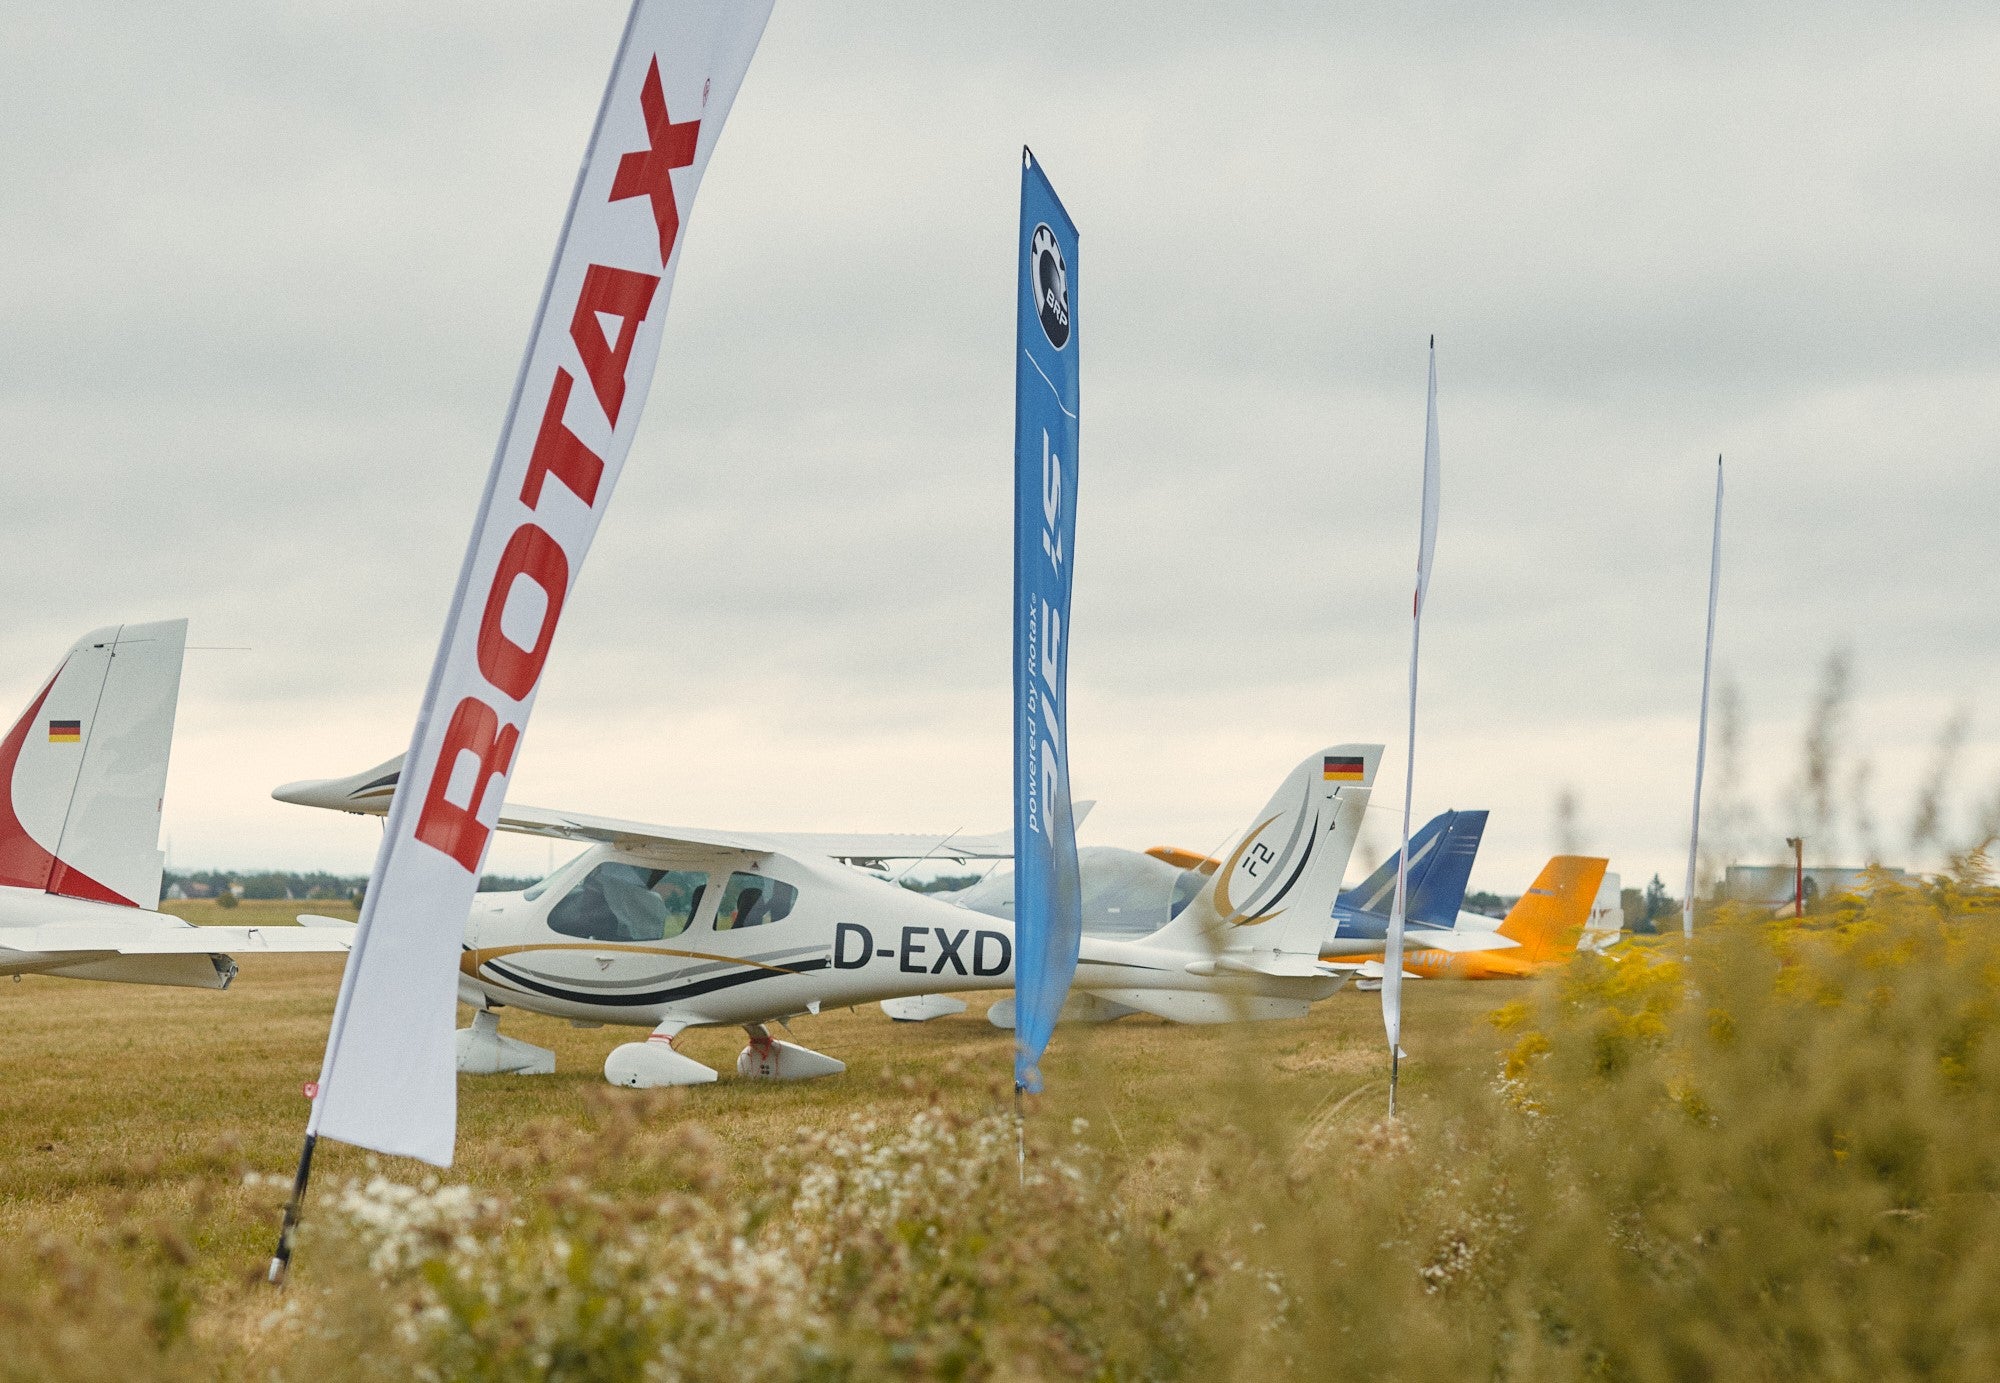 Rotax Reaches Out to Customers During Company Fly-In